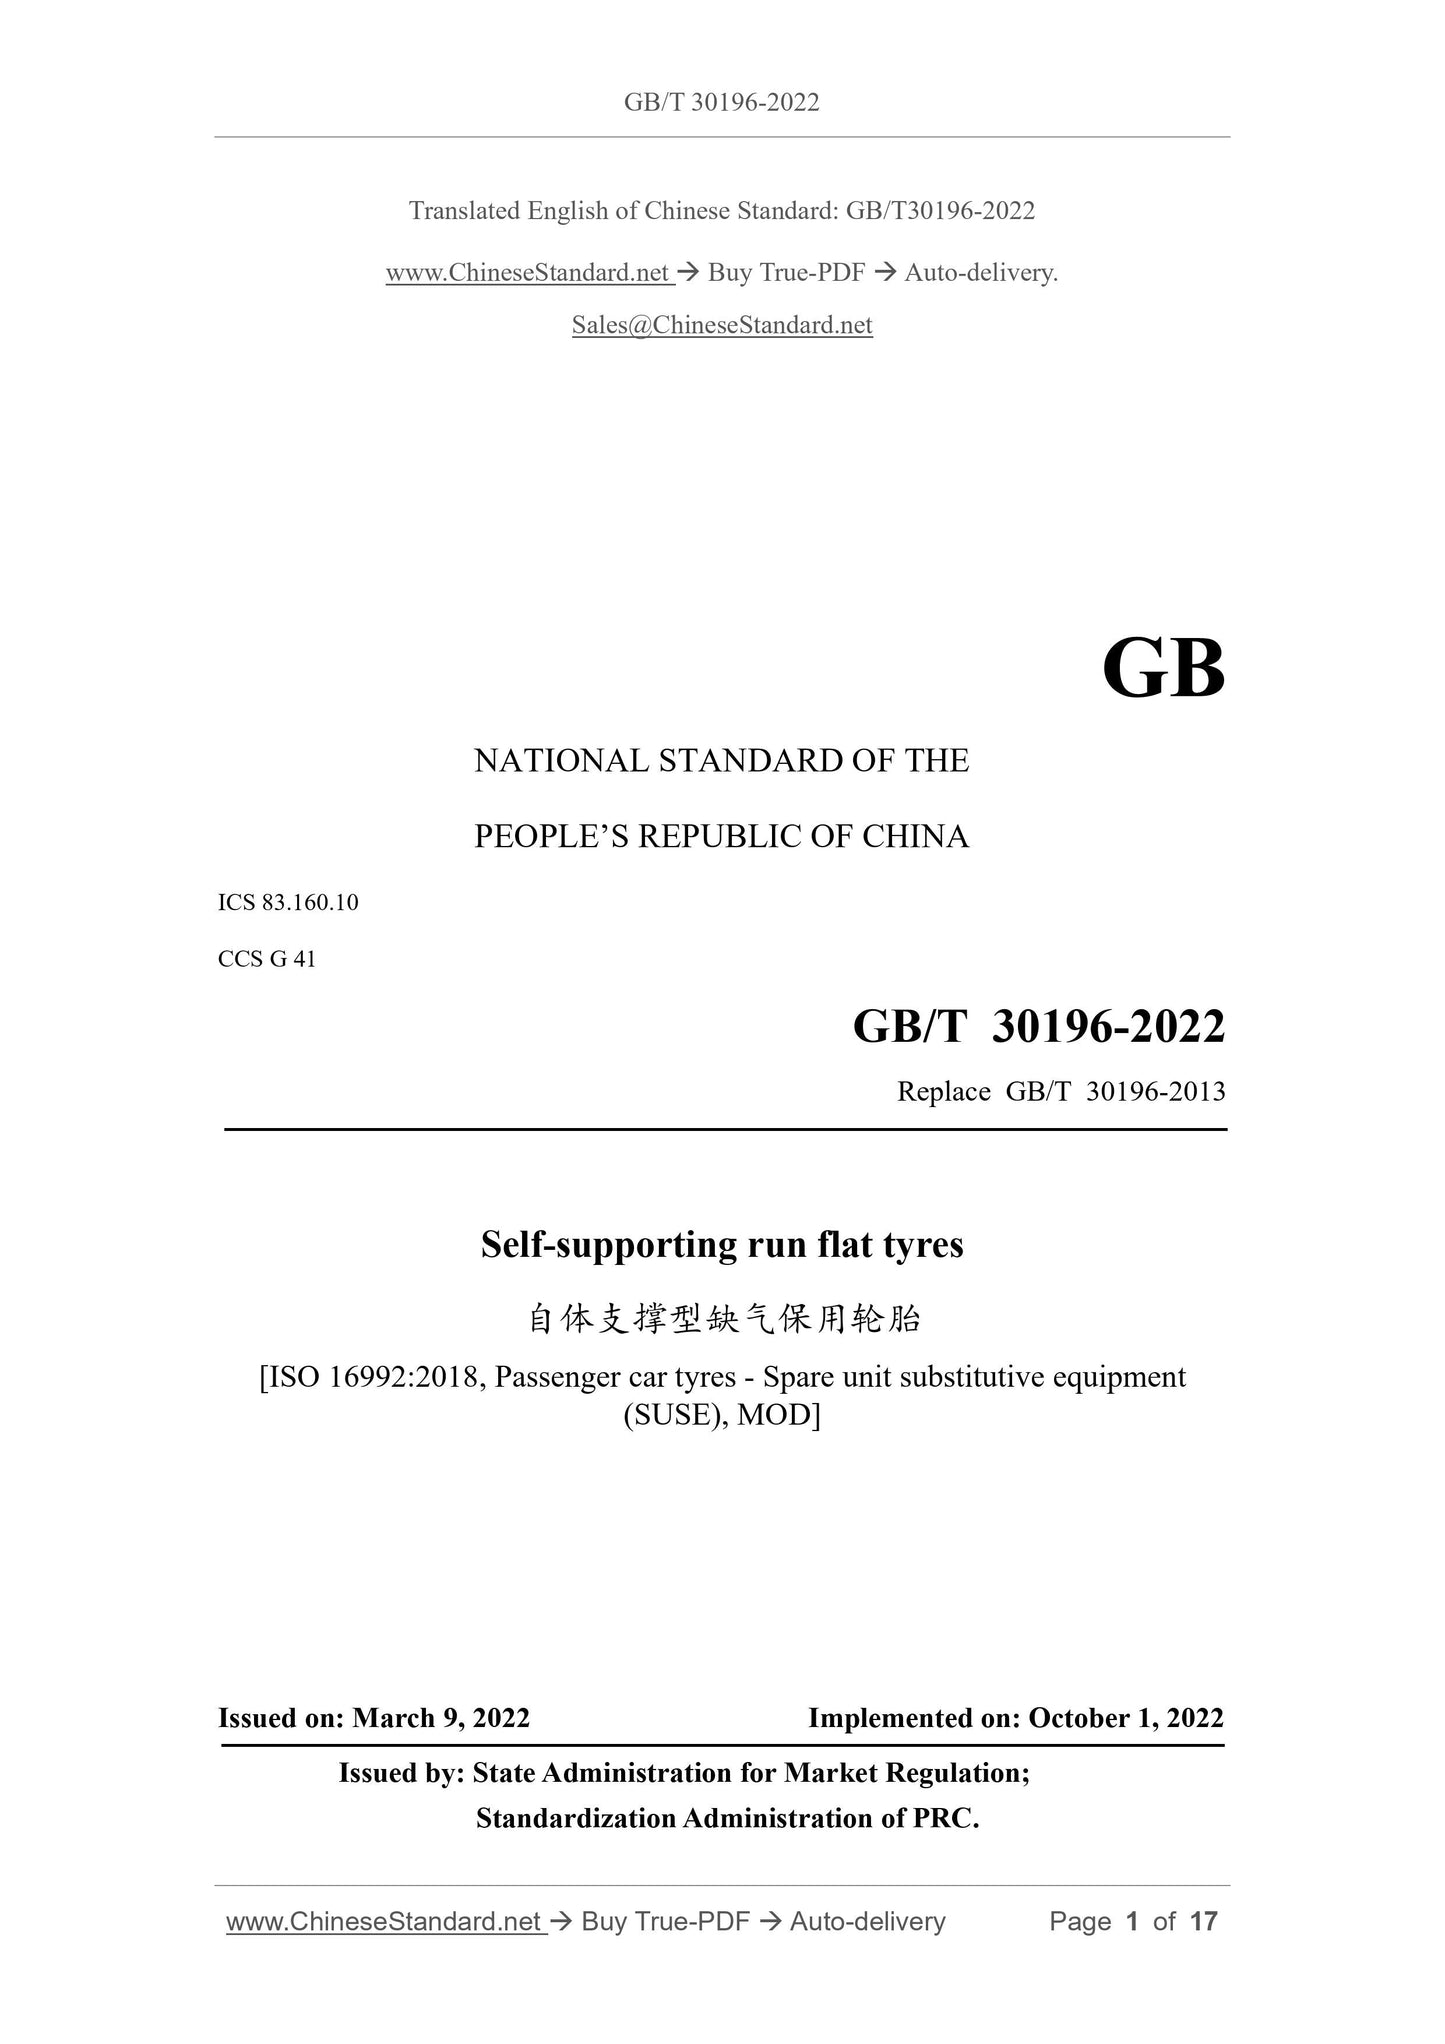 GB/T 30196-2022 Page 1